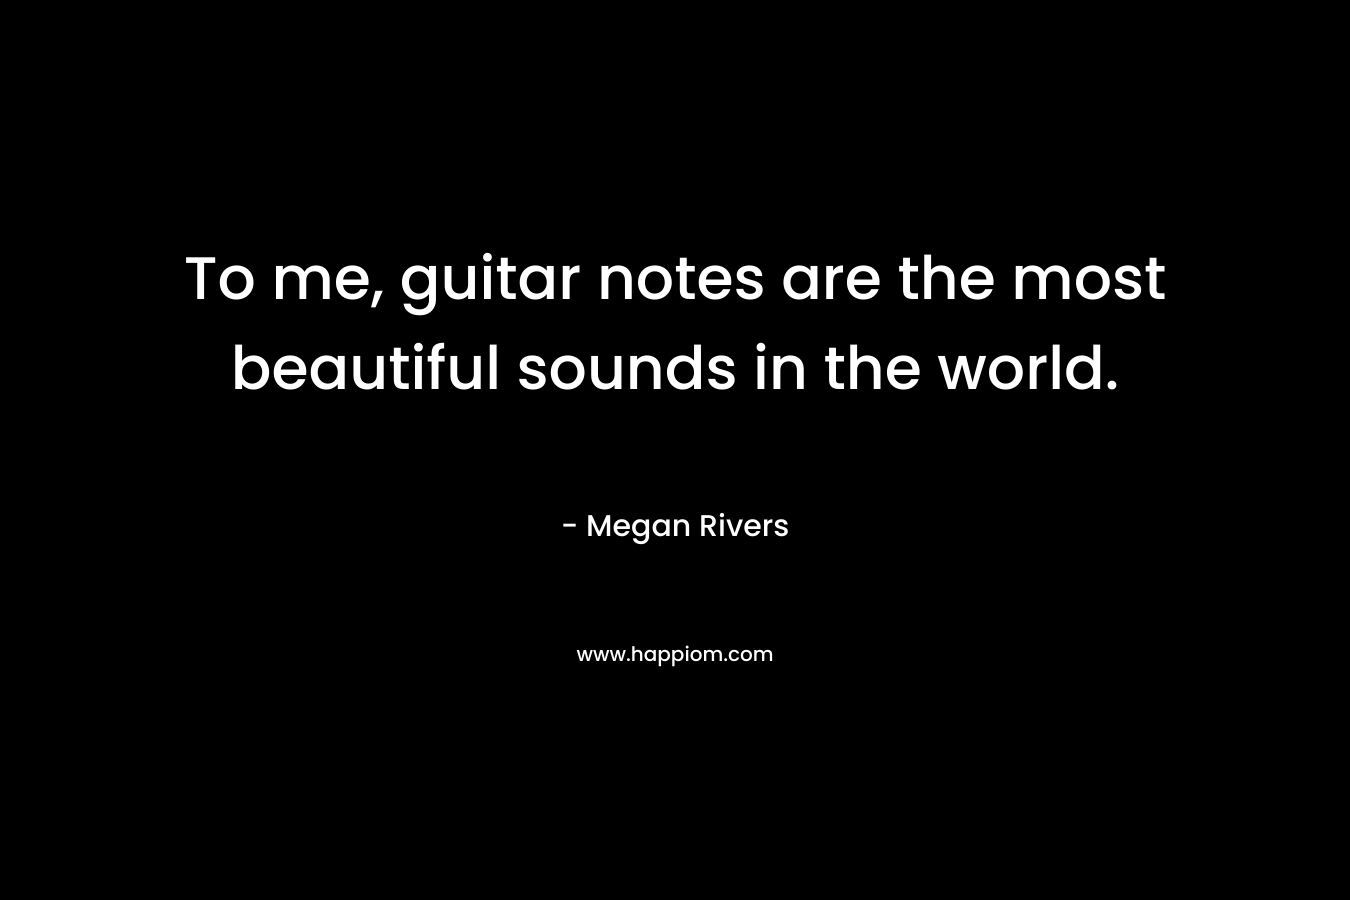 To me, guitar notes are the most beautiful sounds in the world.